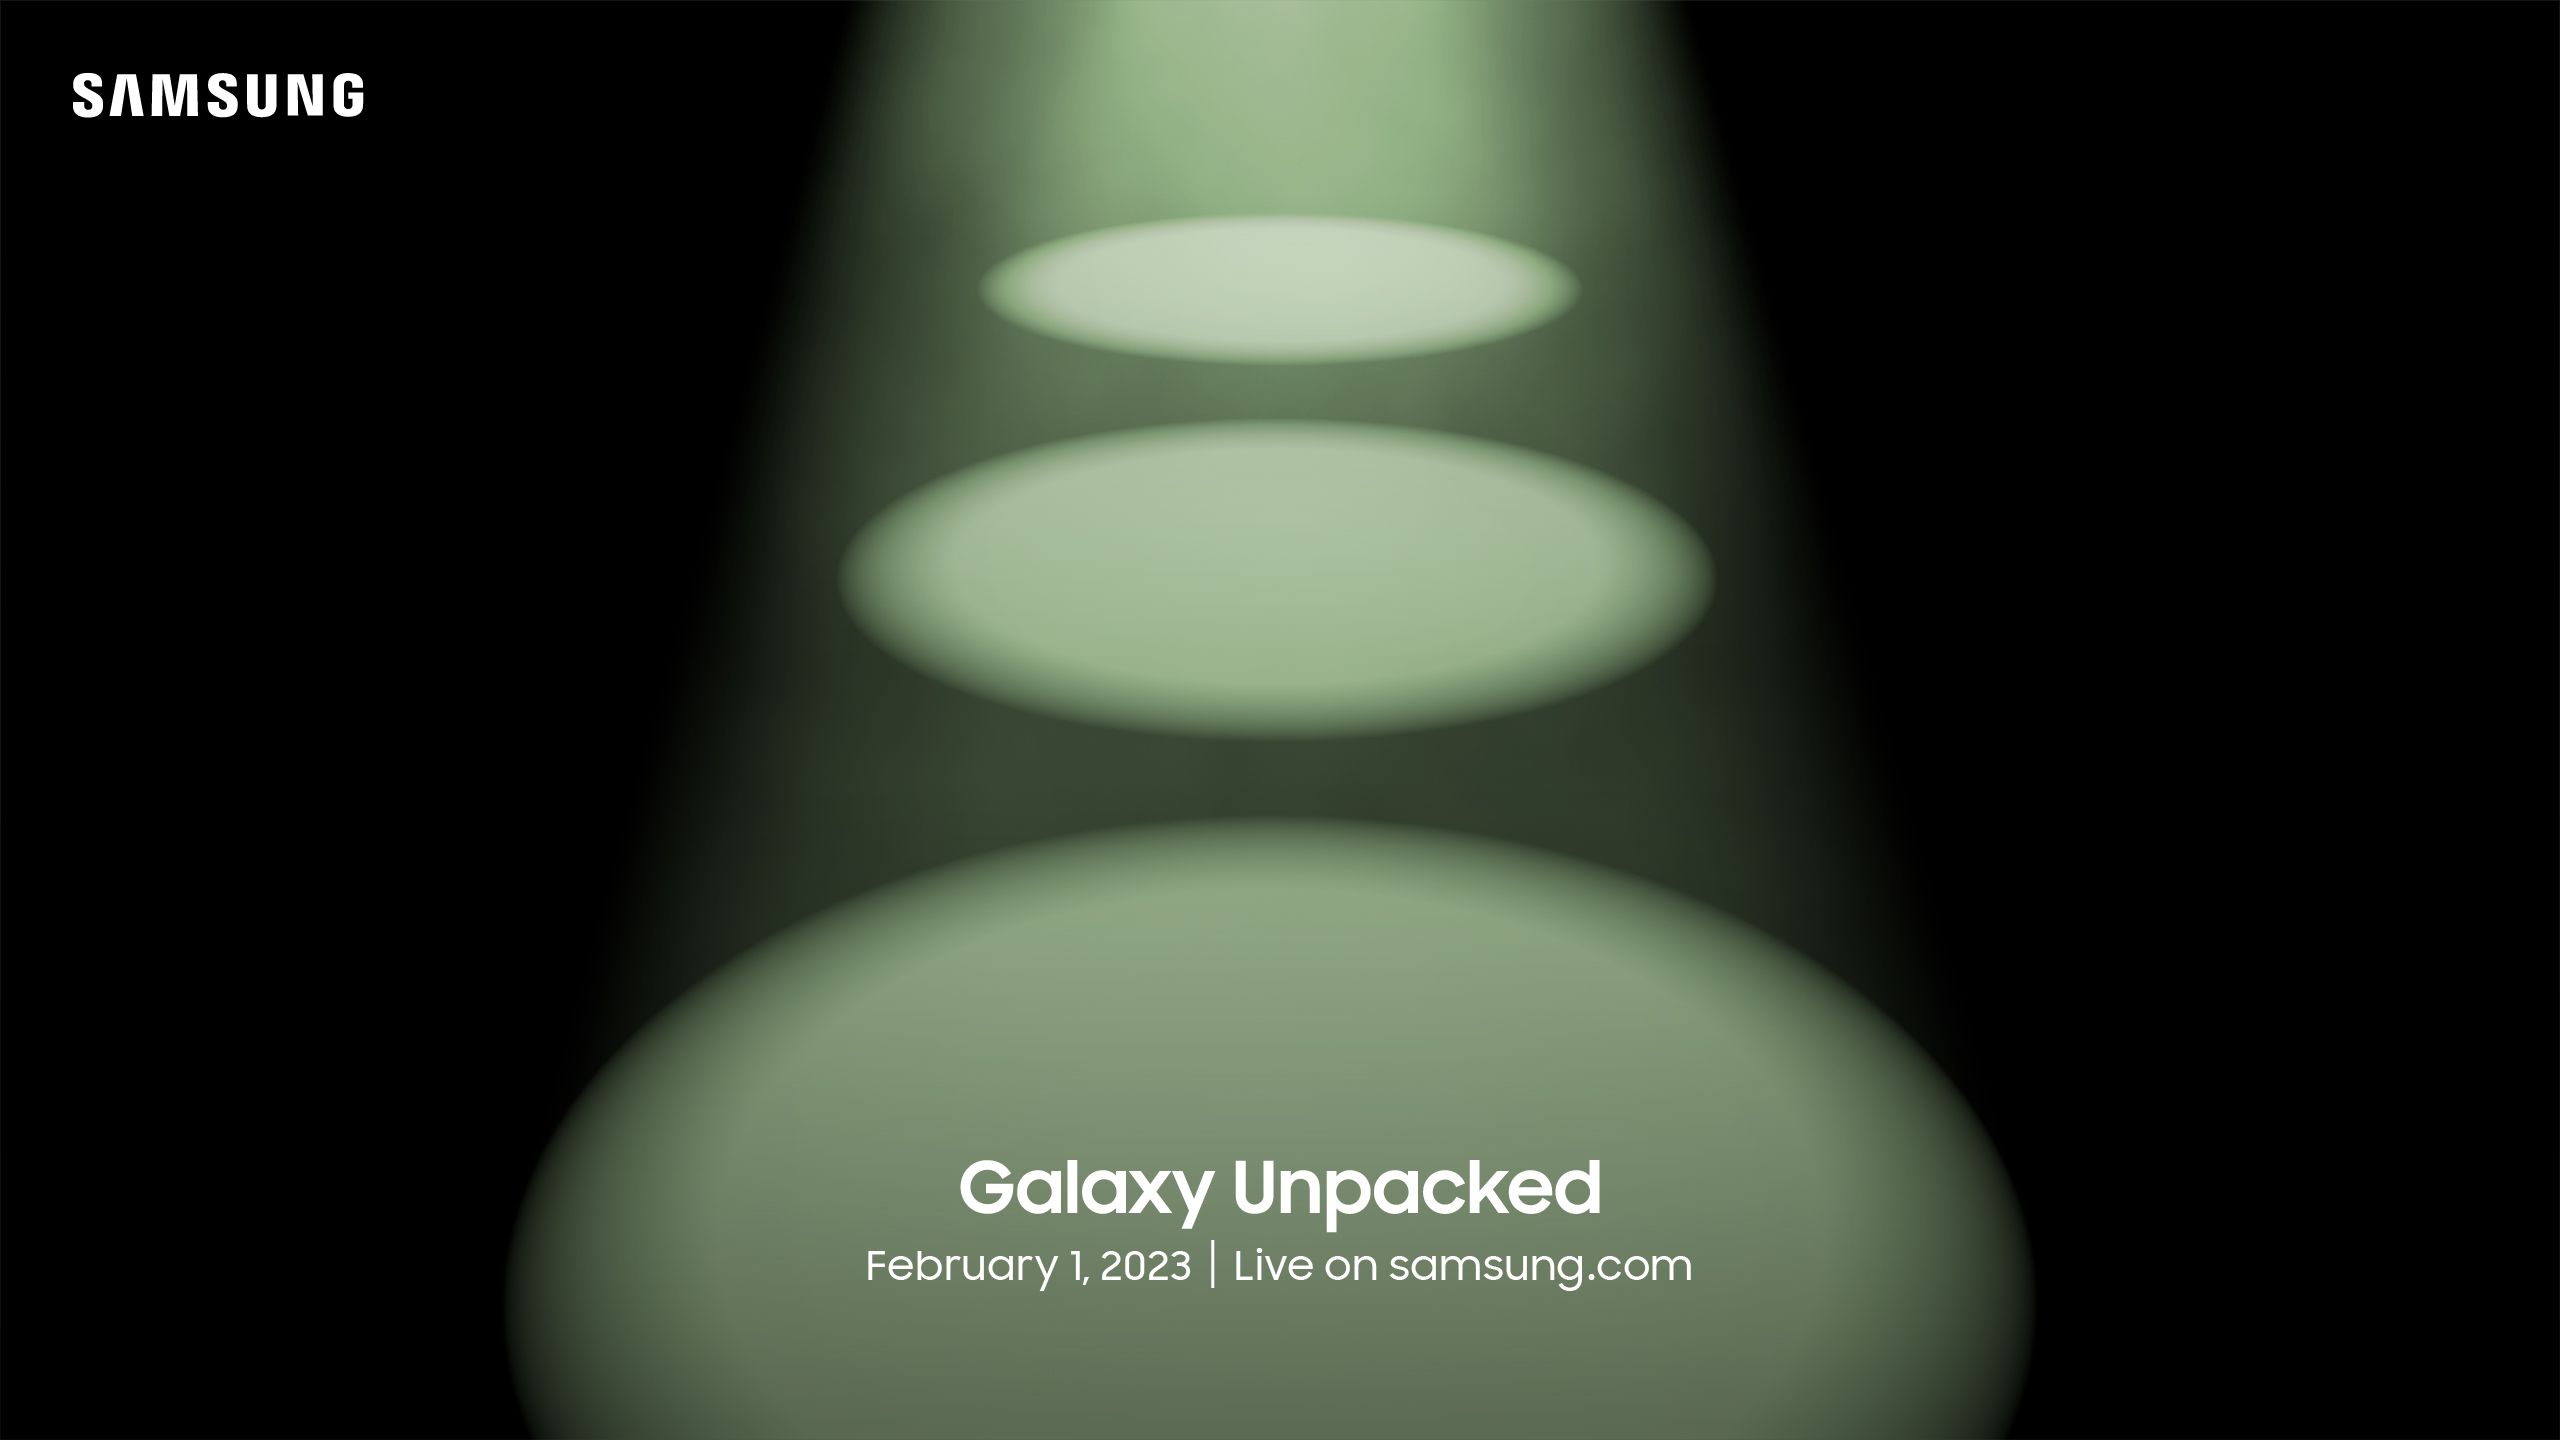 Samsung Galaxy Unpacked set for February 1, reservations now open with up to 0 credit offer